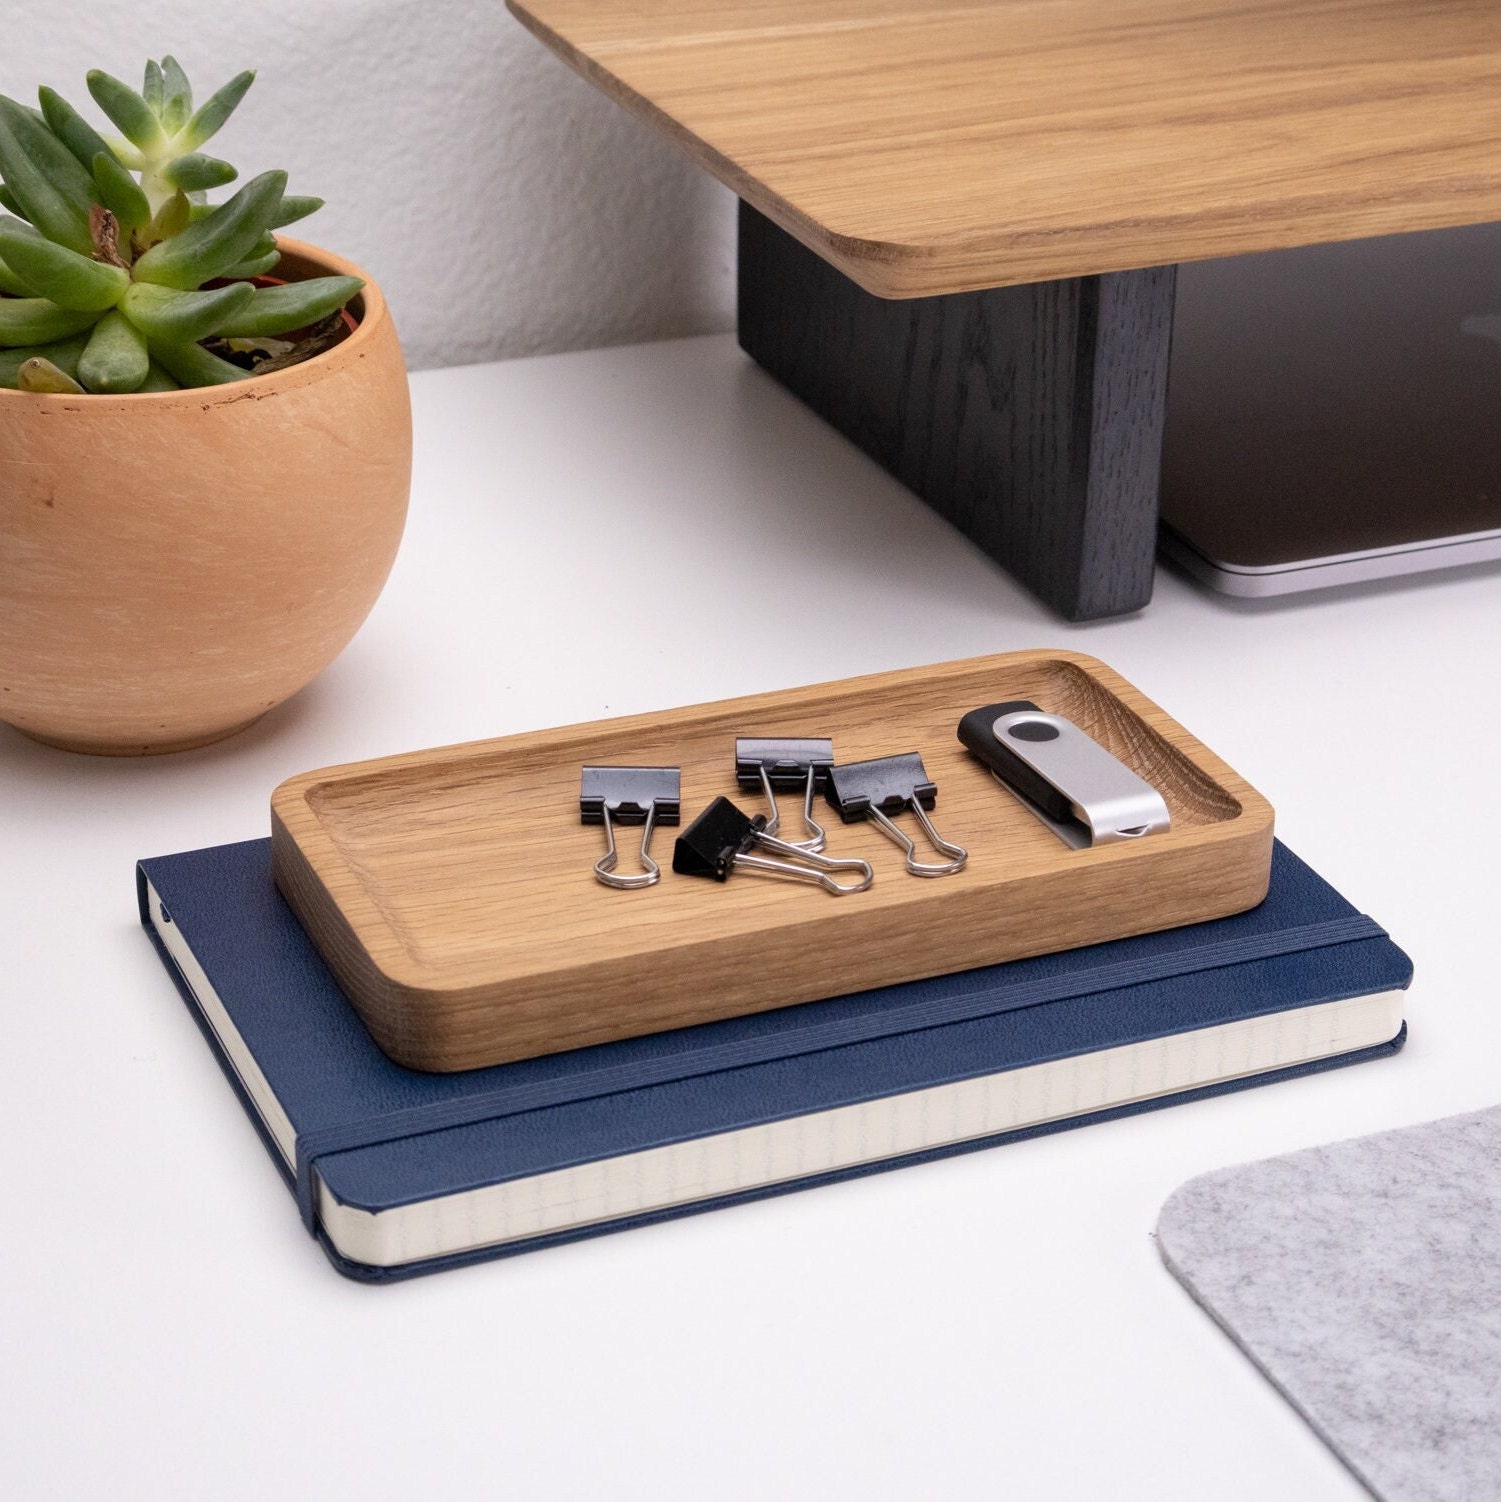 Small Desk Organization Tray essentials. Catchall Tray for Desk or